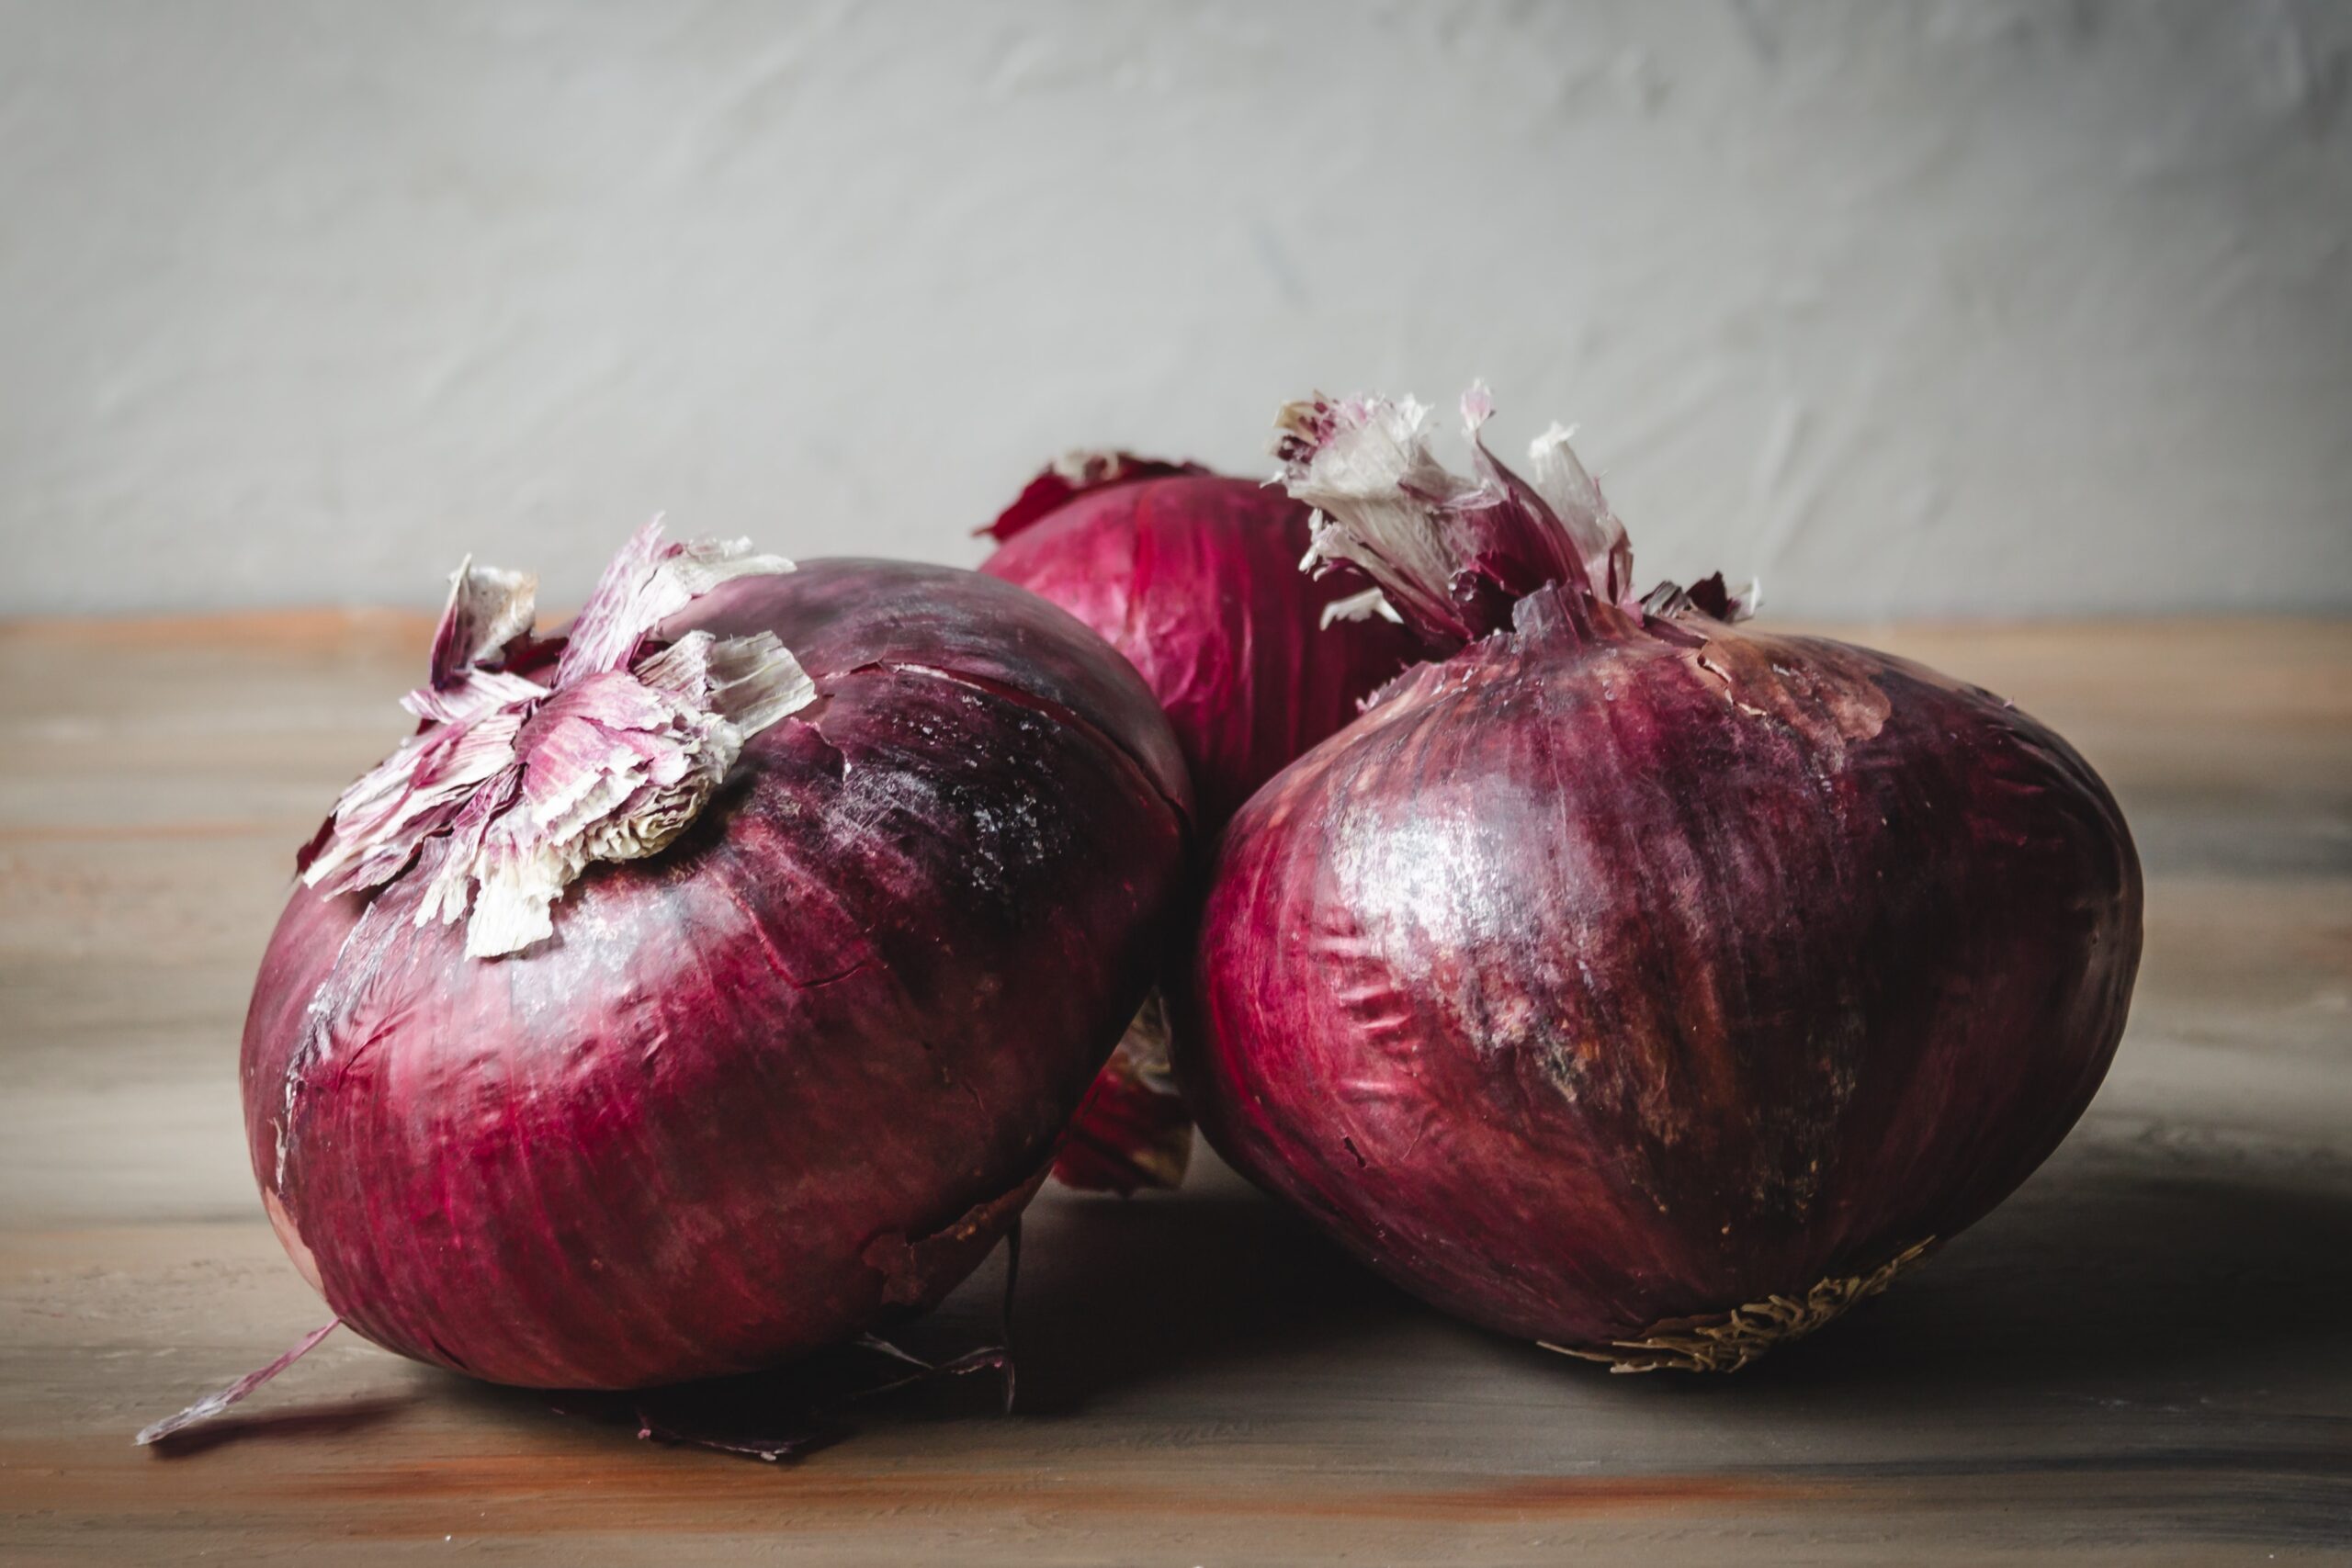 Red Onions on a table - a primary cause of a salmonella outbreak